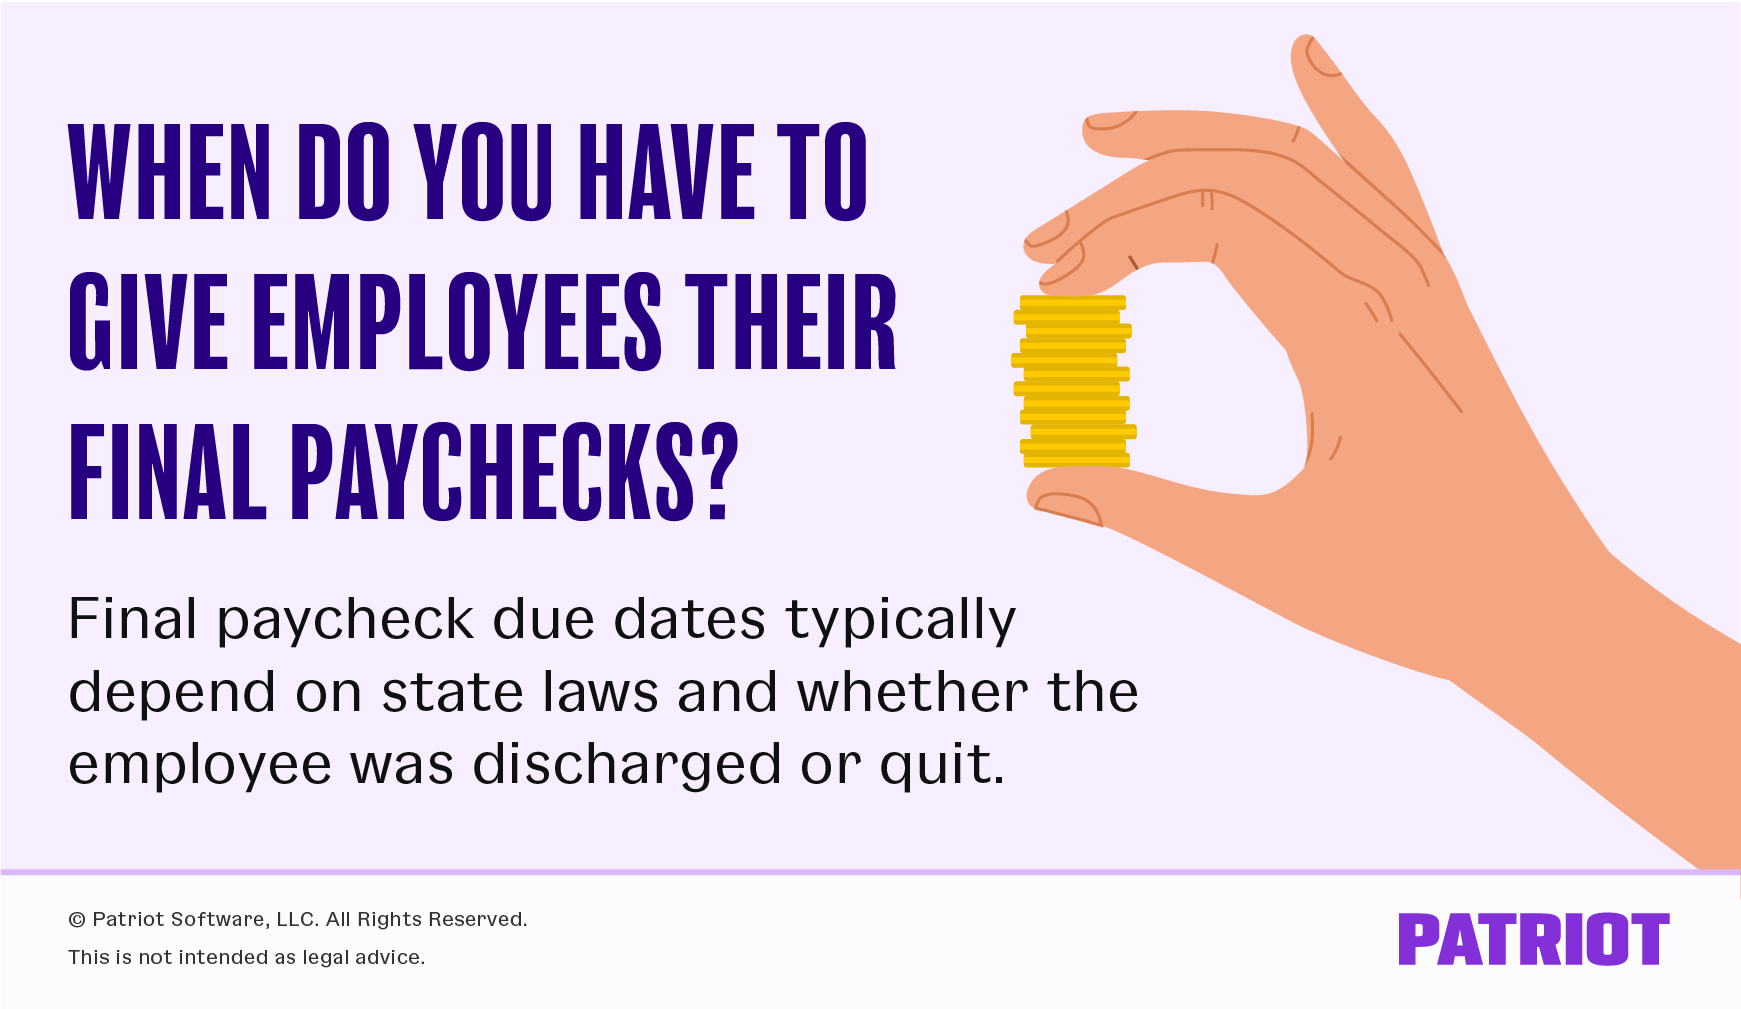 When do you have to give employees their final paychecks? Final paycheck due dates typically depend on state laws and whether the employee was discharged or quit.